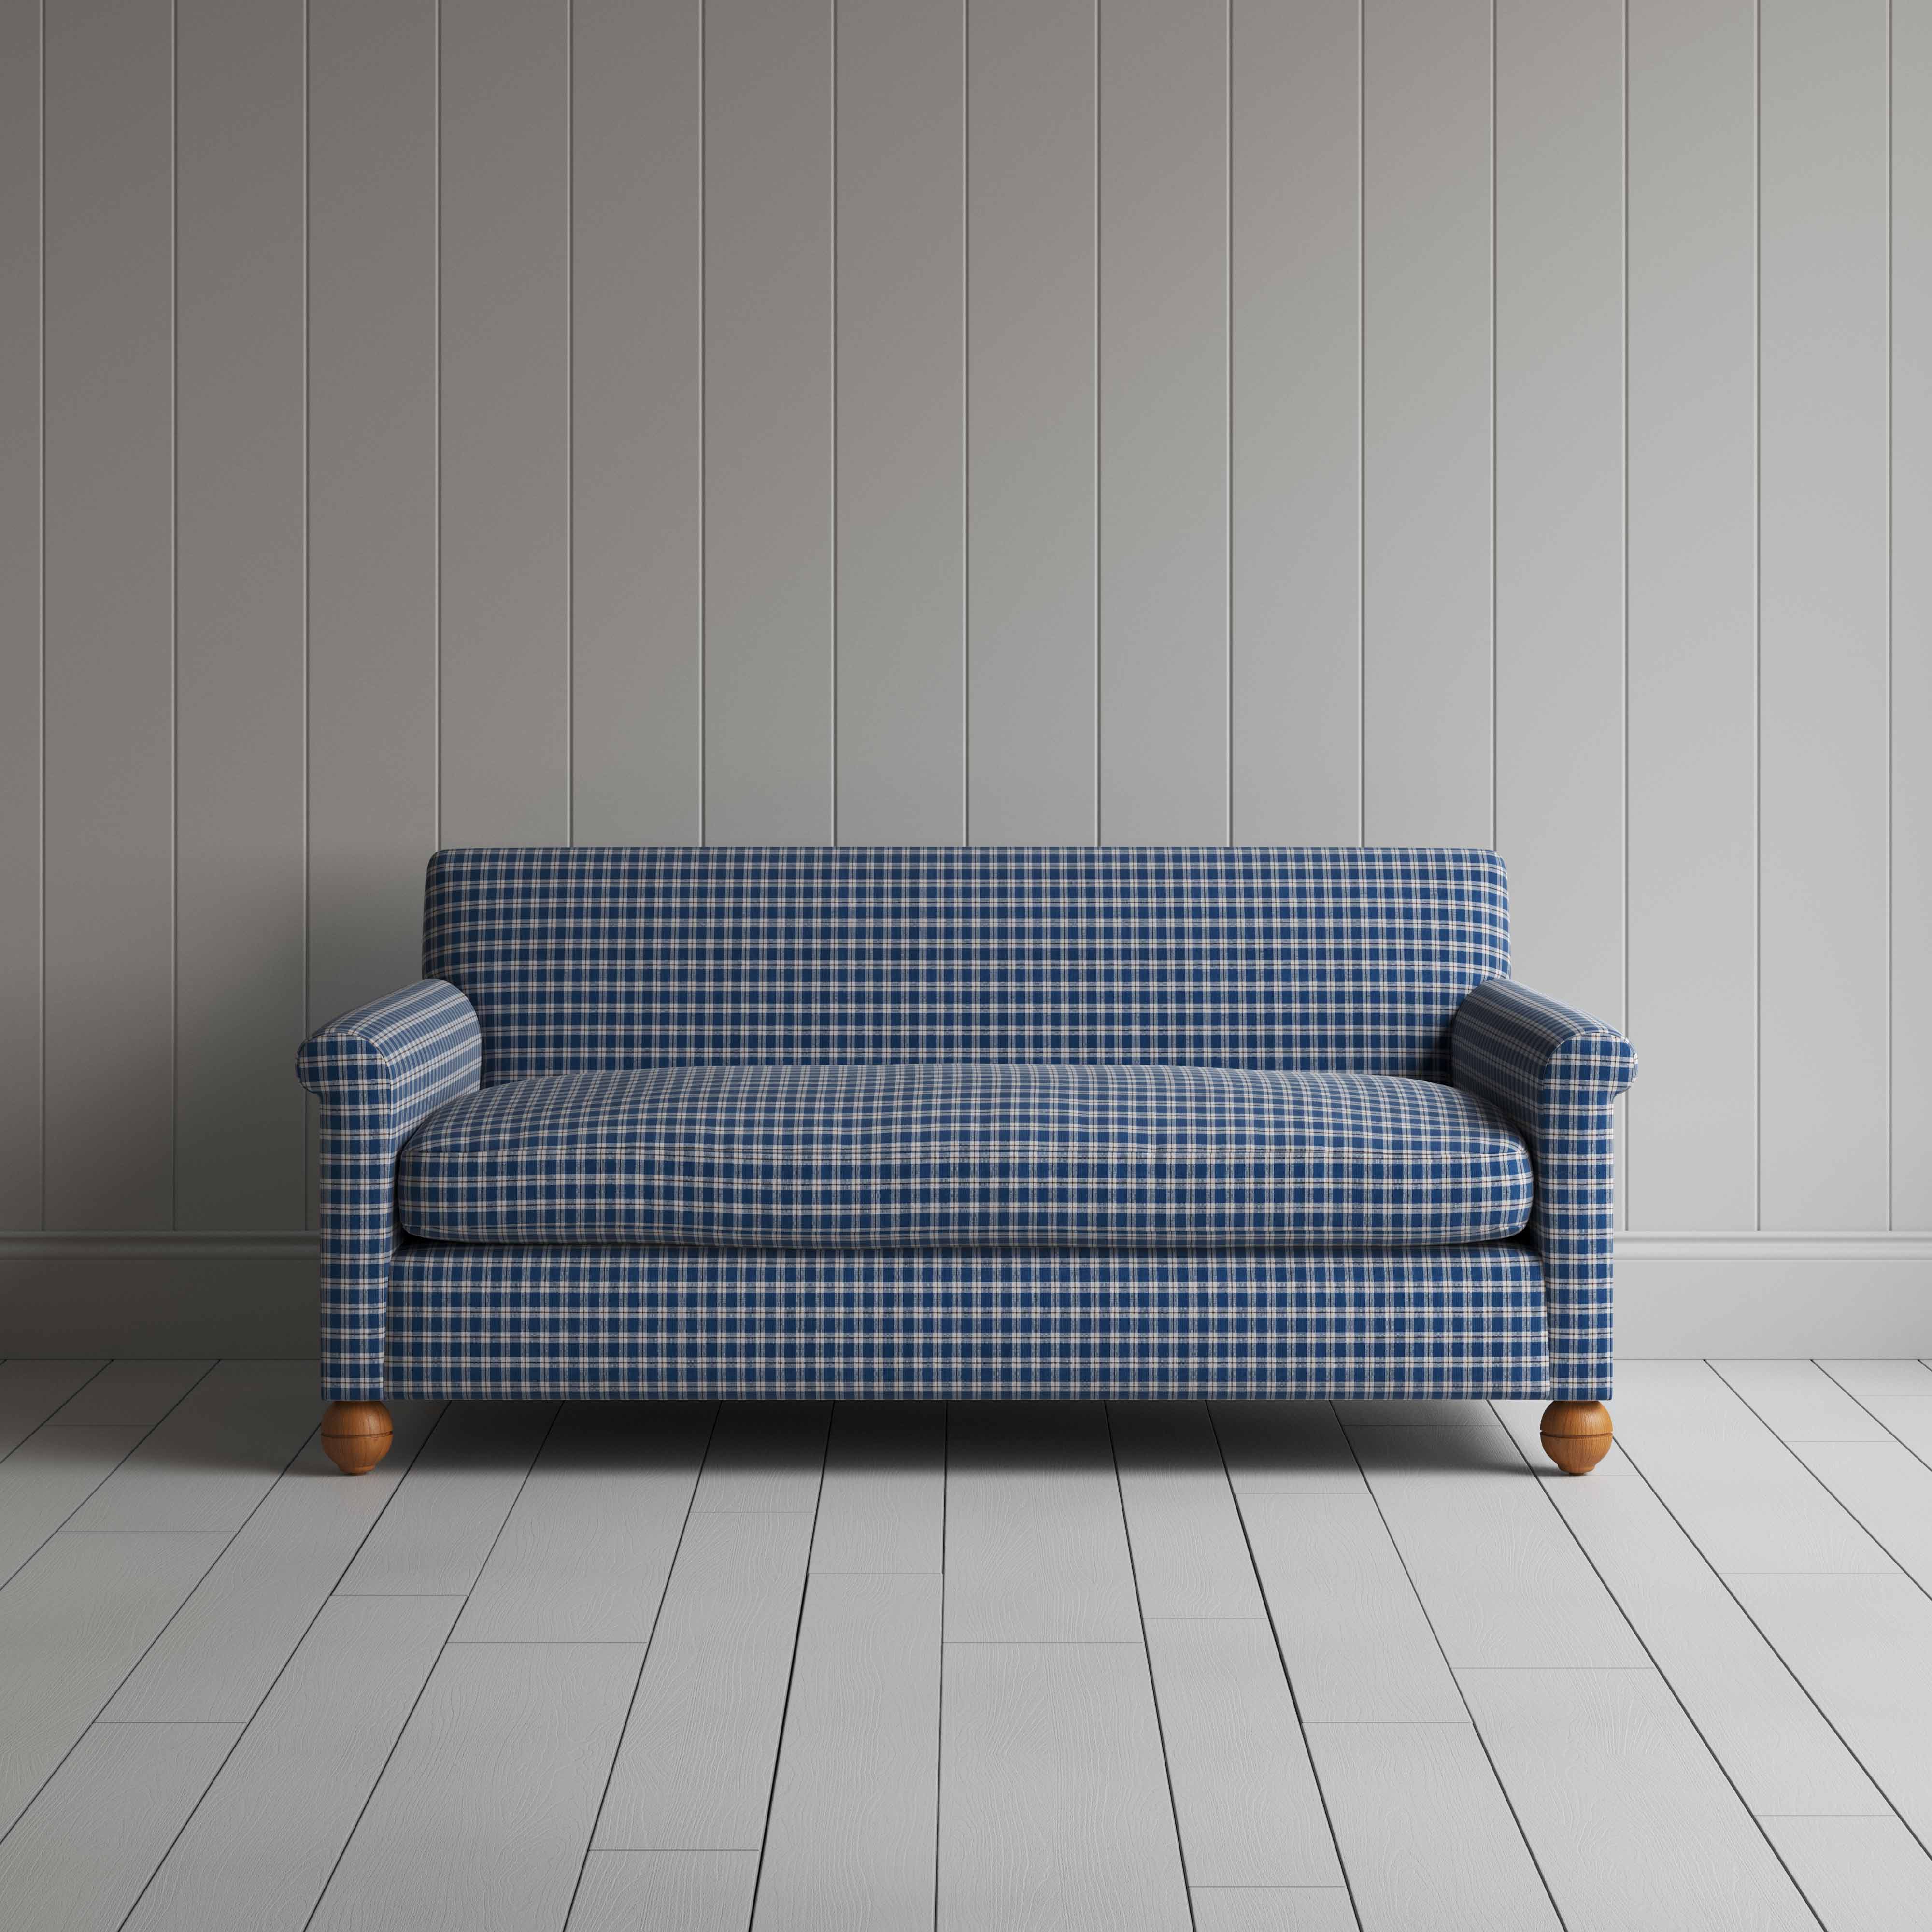  Idler 3 Seater Sofa in Well Plaid Cotton, Blue Brown 